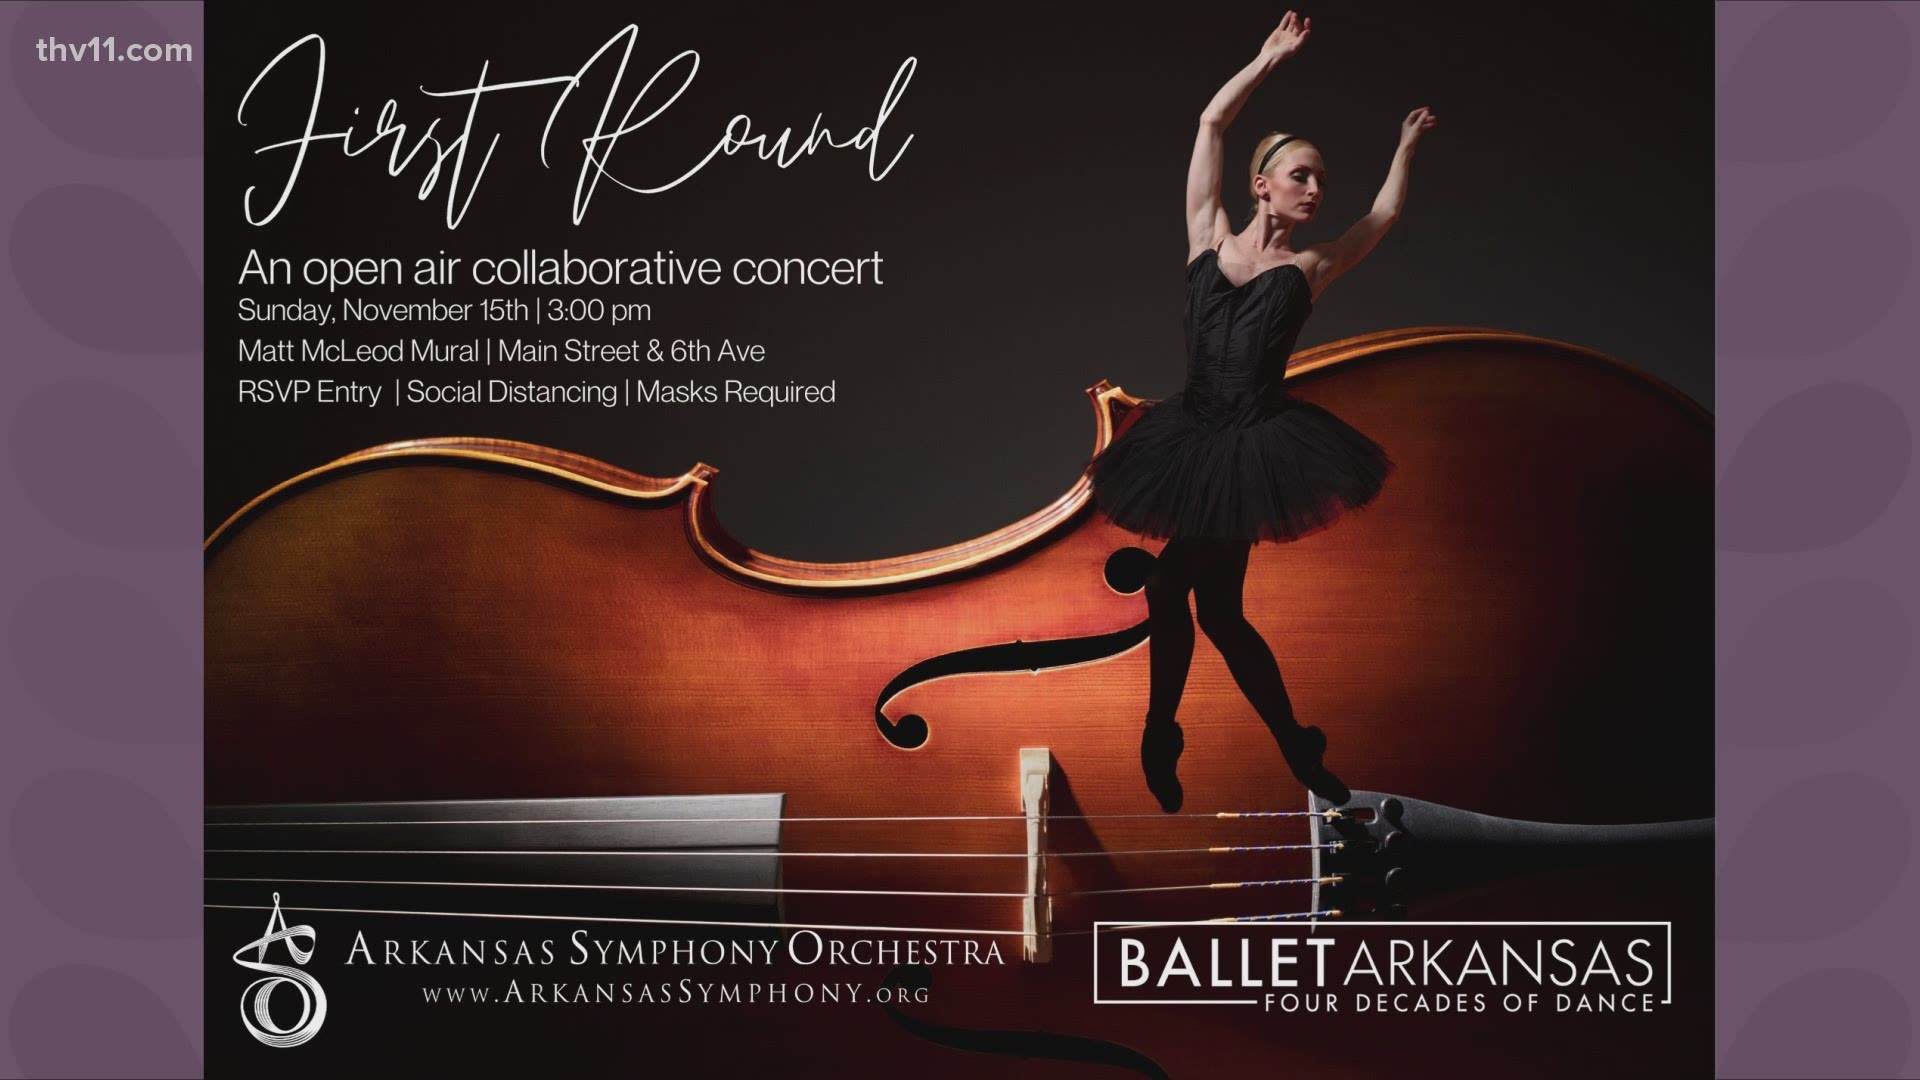 Ballet Arkansas and Arkansas Symphony Orchestra present "First Round," an open-air concert on Nov. 15 in downtown Little Rock.